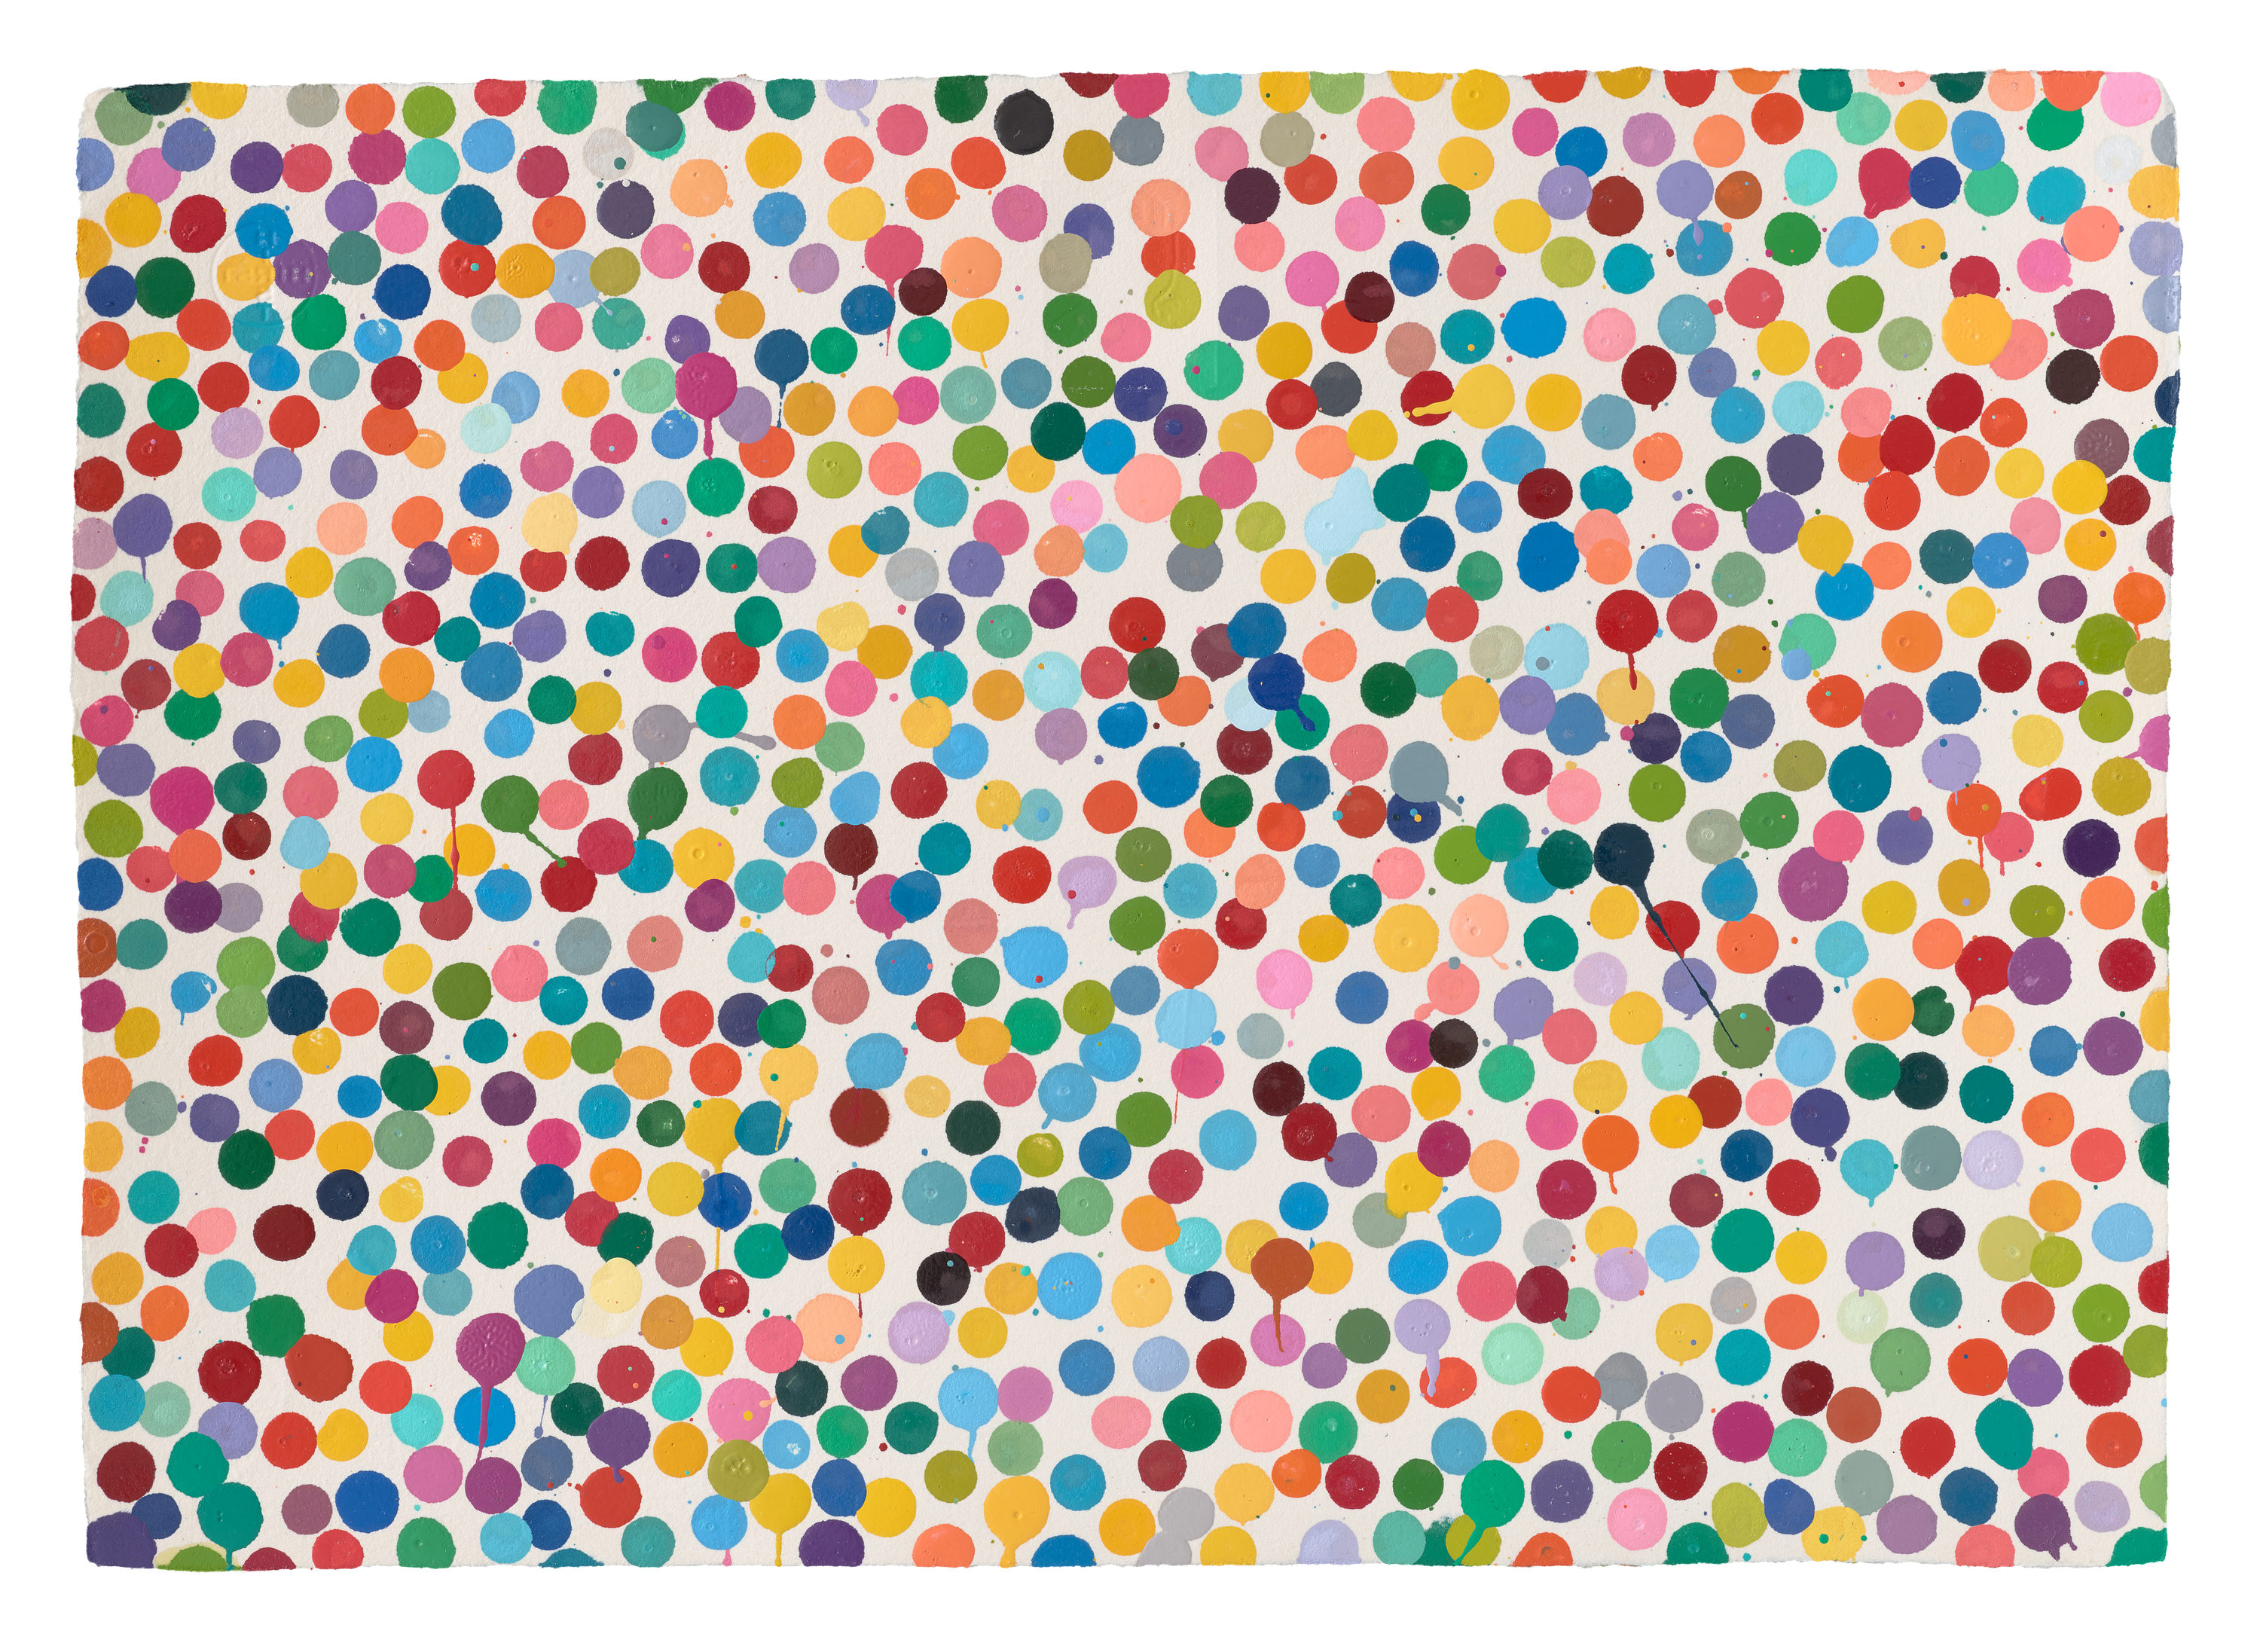 One of the 10,000 pieces from Damien Hirstâ€™s first art project utilizing NFTs. (Source)